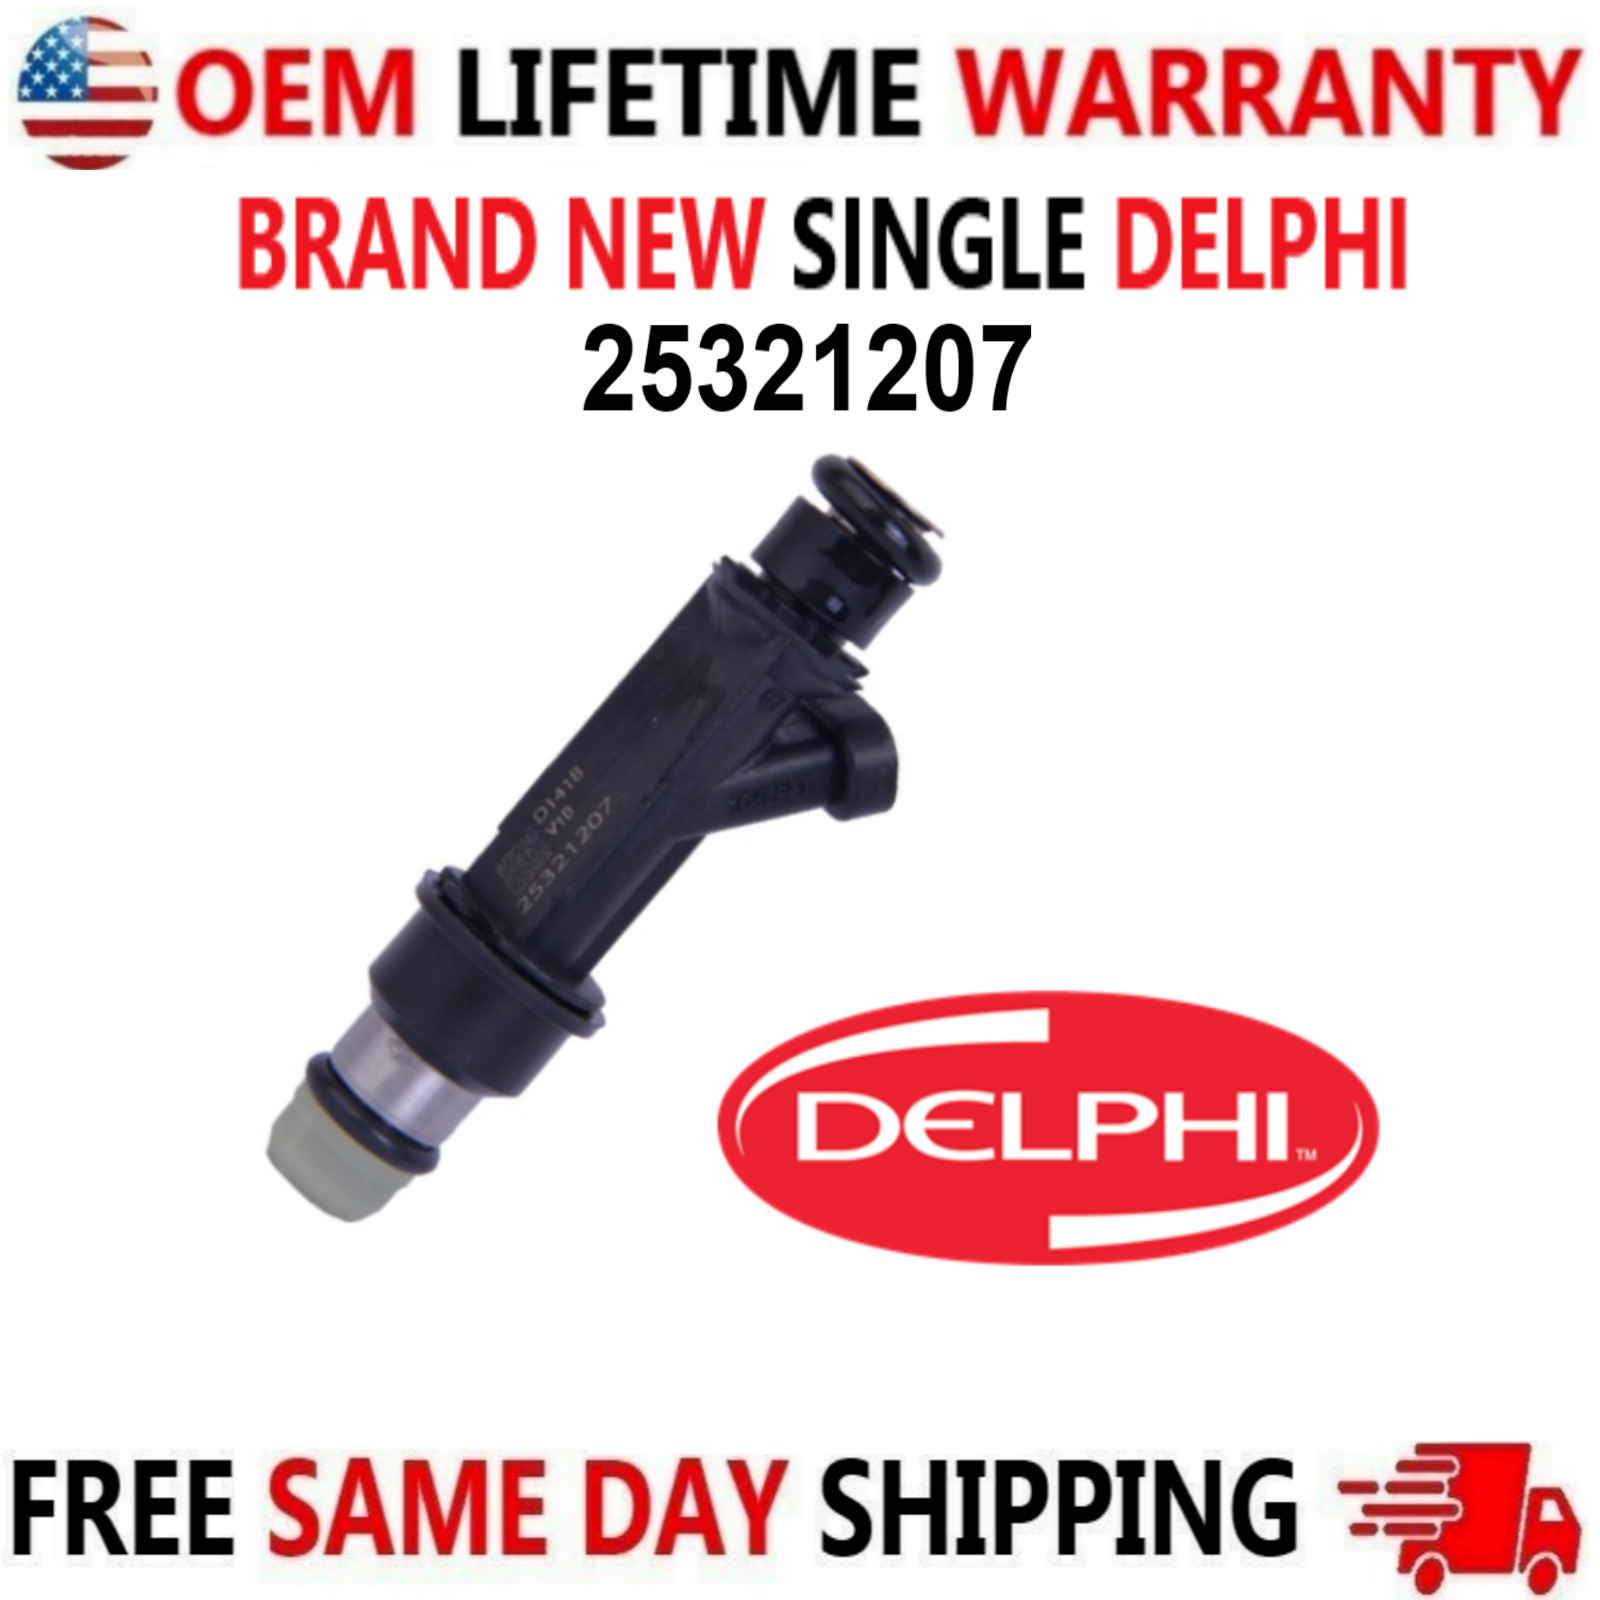 NEW DELPHI Single fueI Injector for 1999, 2000, 2001, 2002 Oldsmobile Intrigue